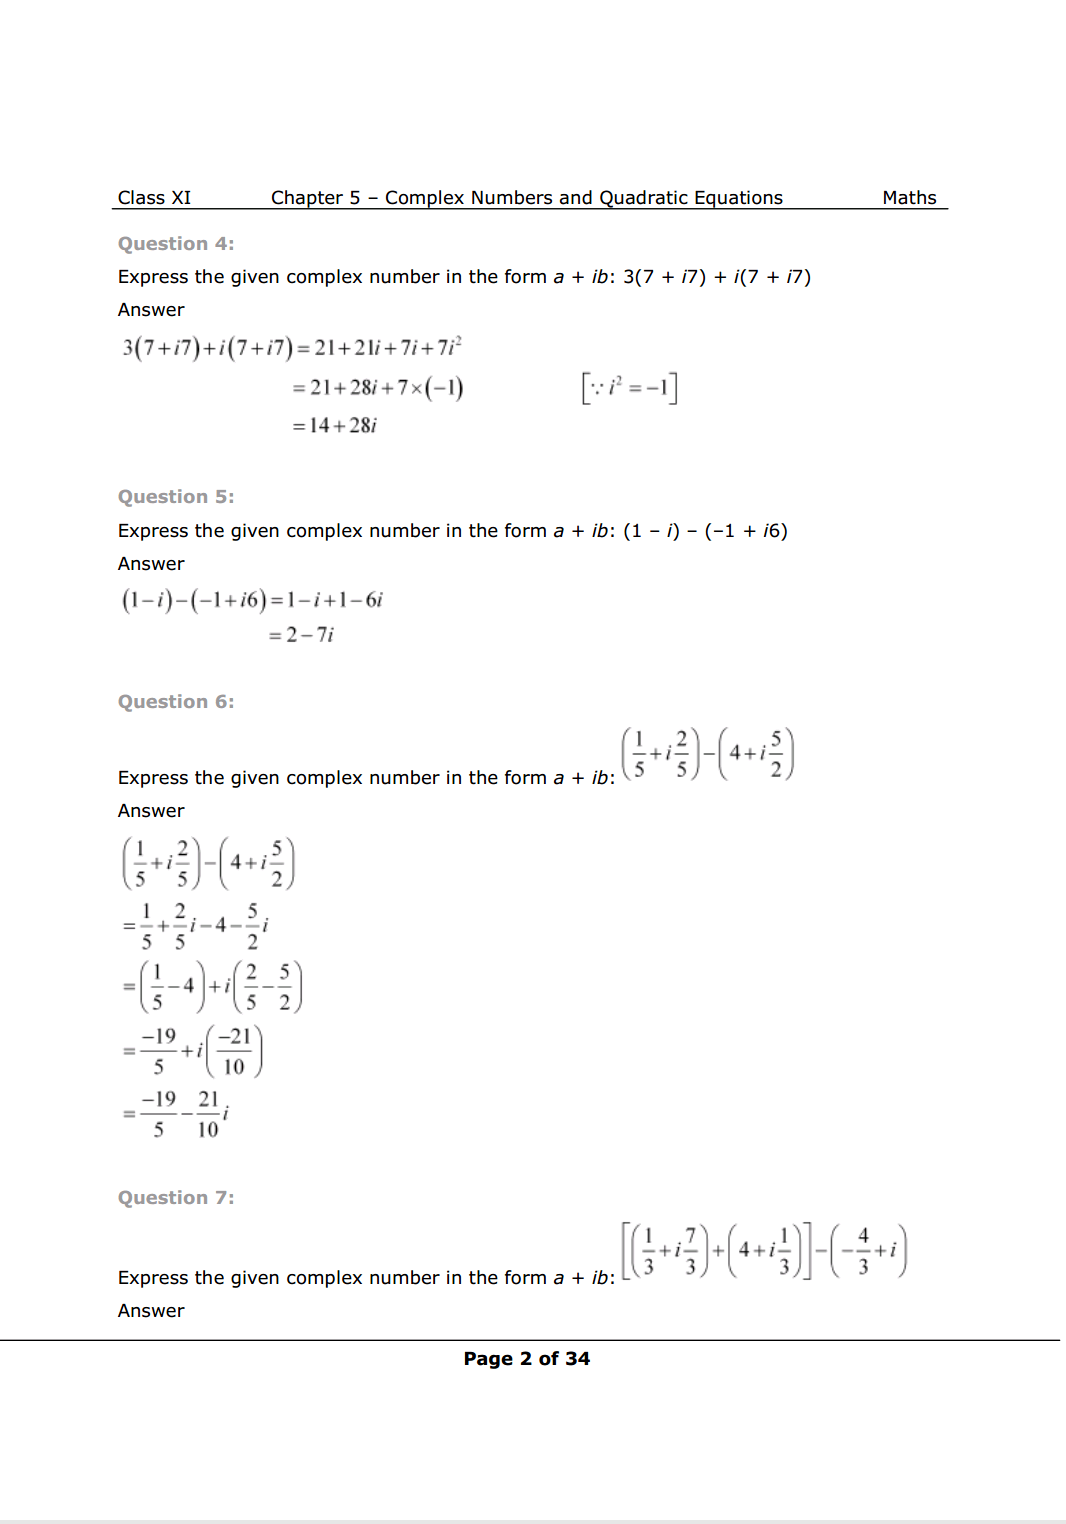 Class 11 math chapter 5 exercise 5.1 Solutions Image 2